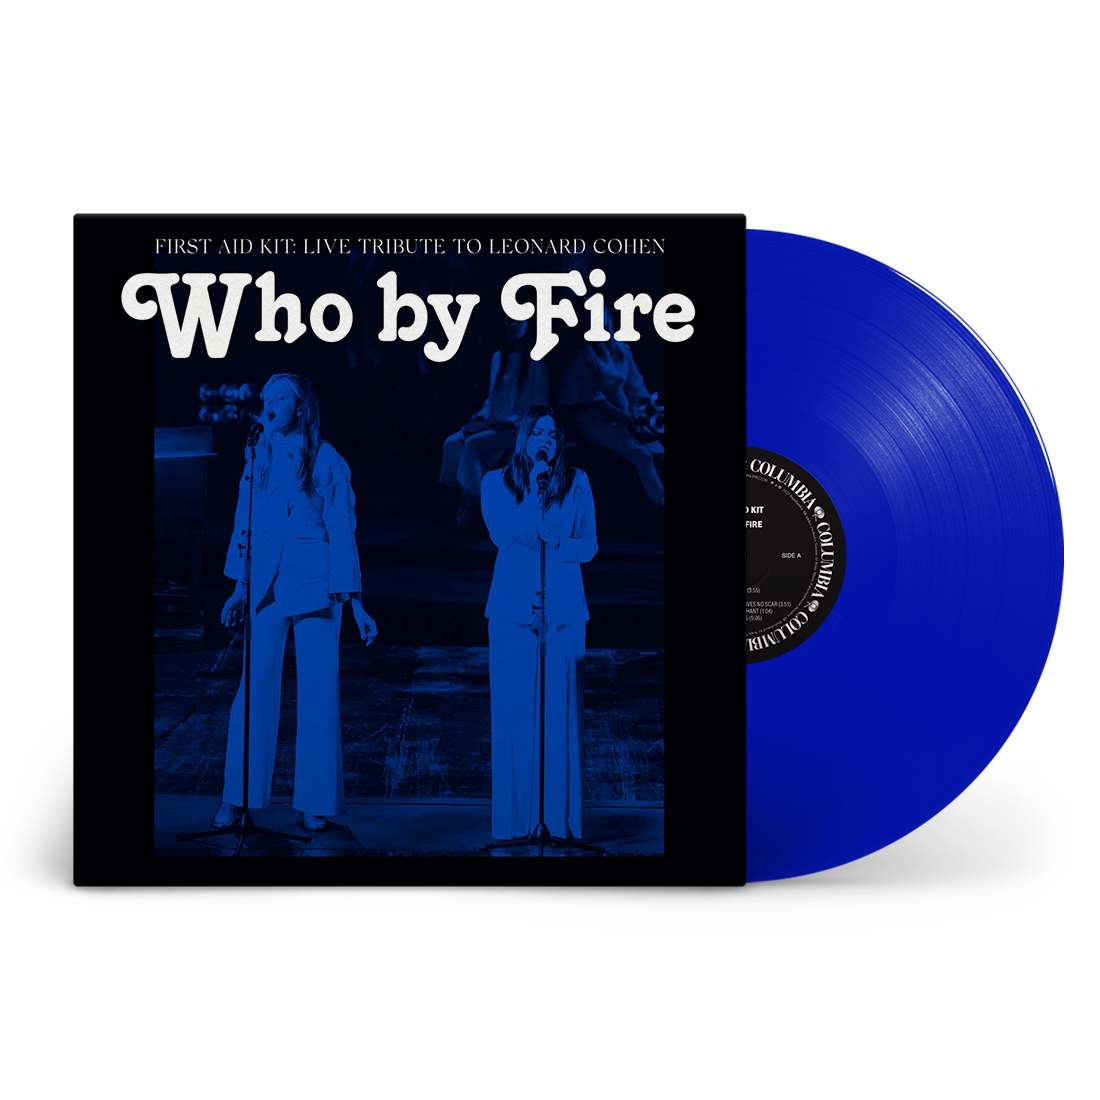 First Aid Kit - Who By Fire (Live Tribute To Leonard Cohen): Limited Blue Vinyl LP